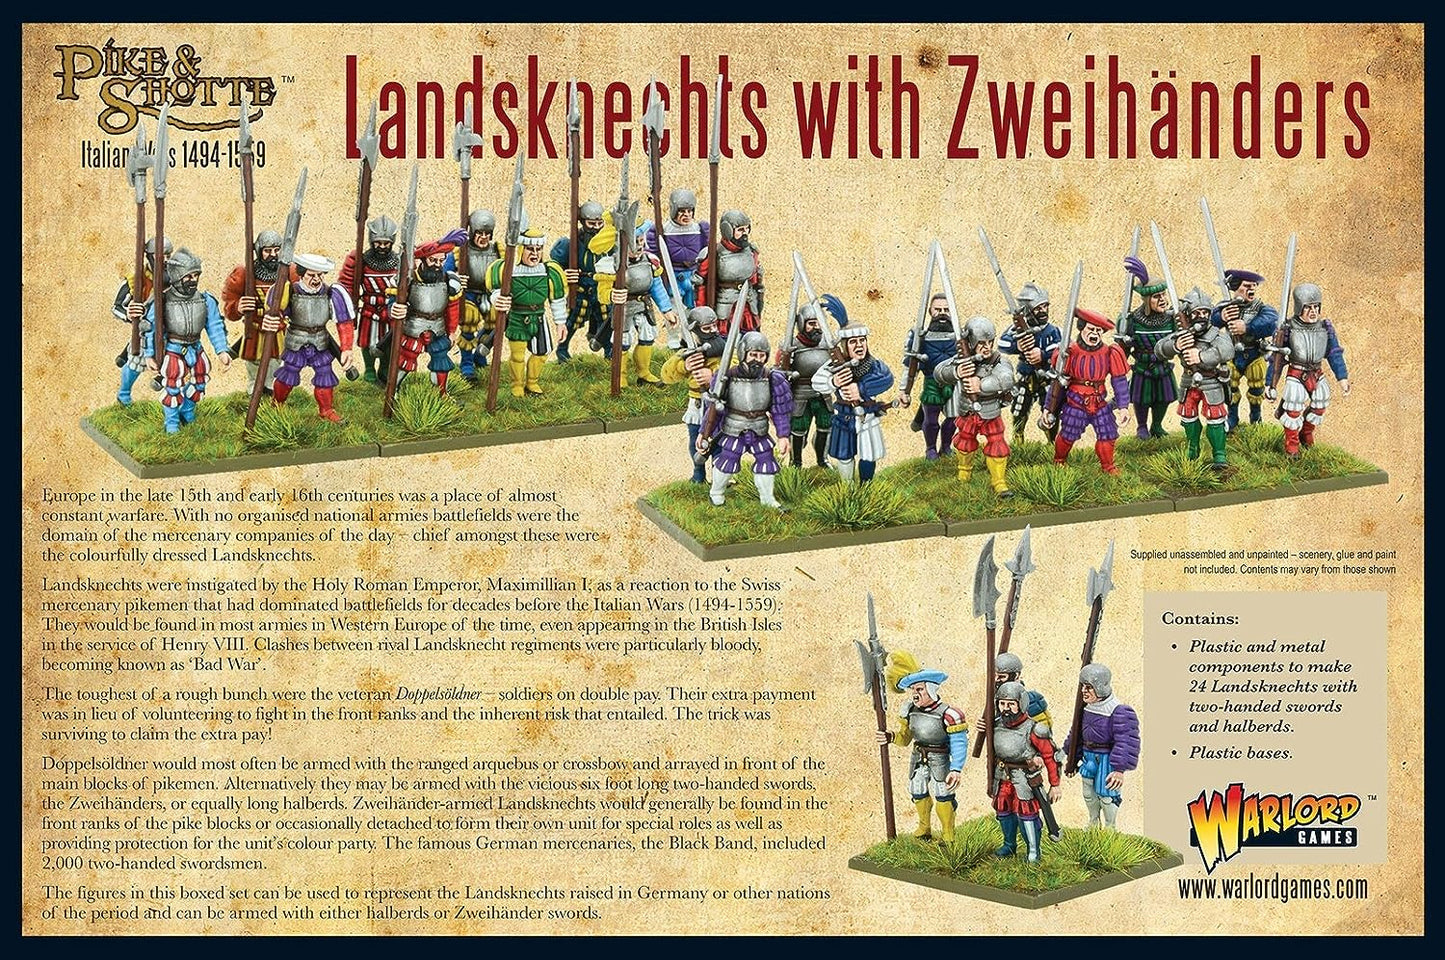 Warlord Games Pike and Shotthe - Landsknechts with Zweihanders, Wargaming Miniatures  #202016002